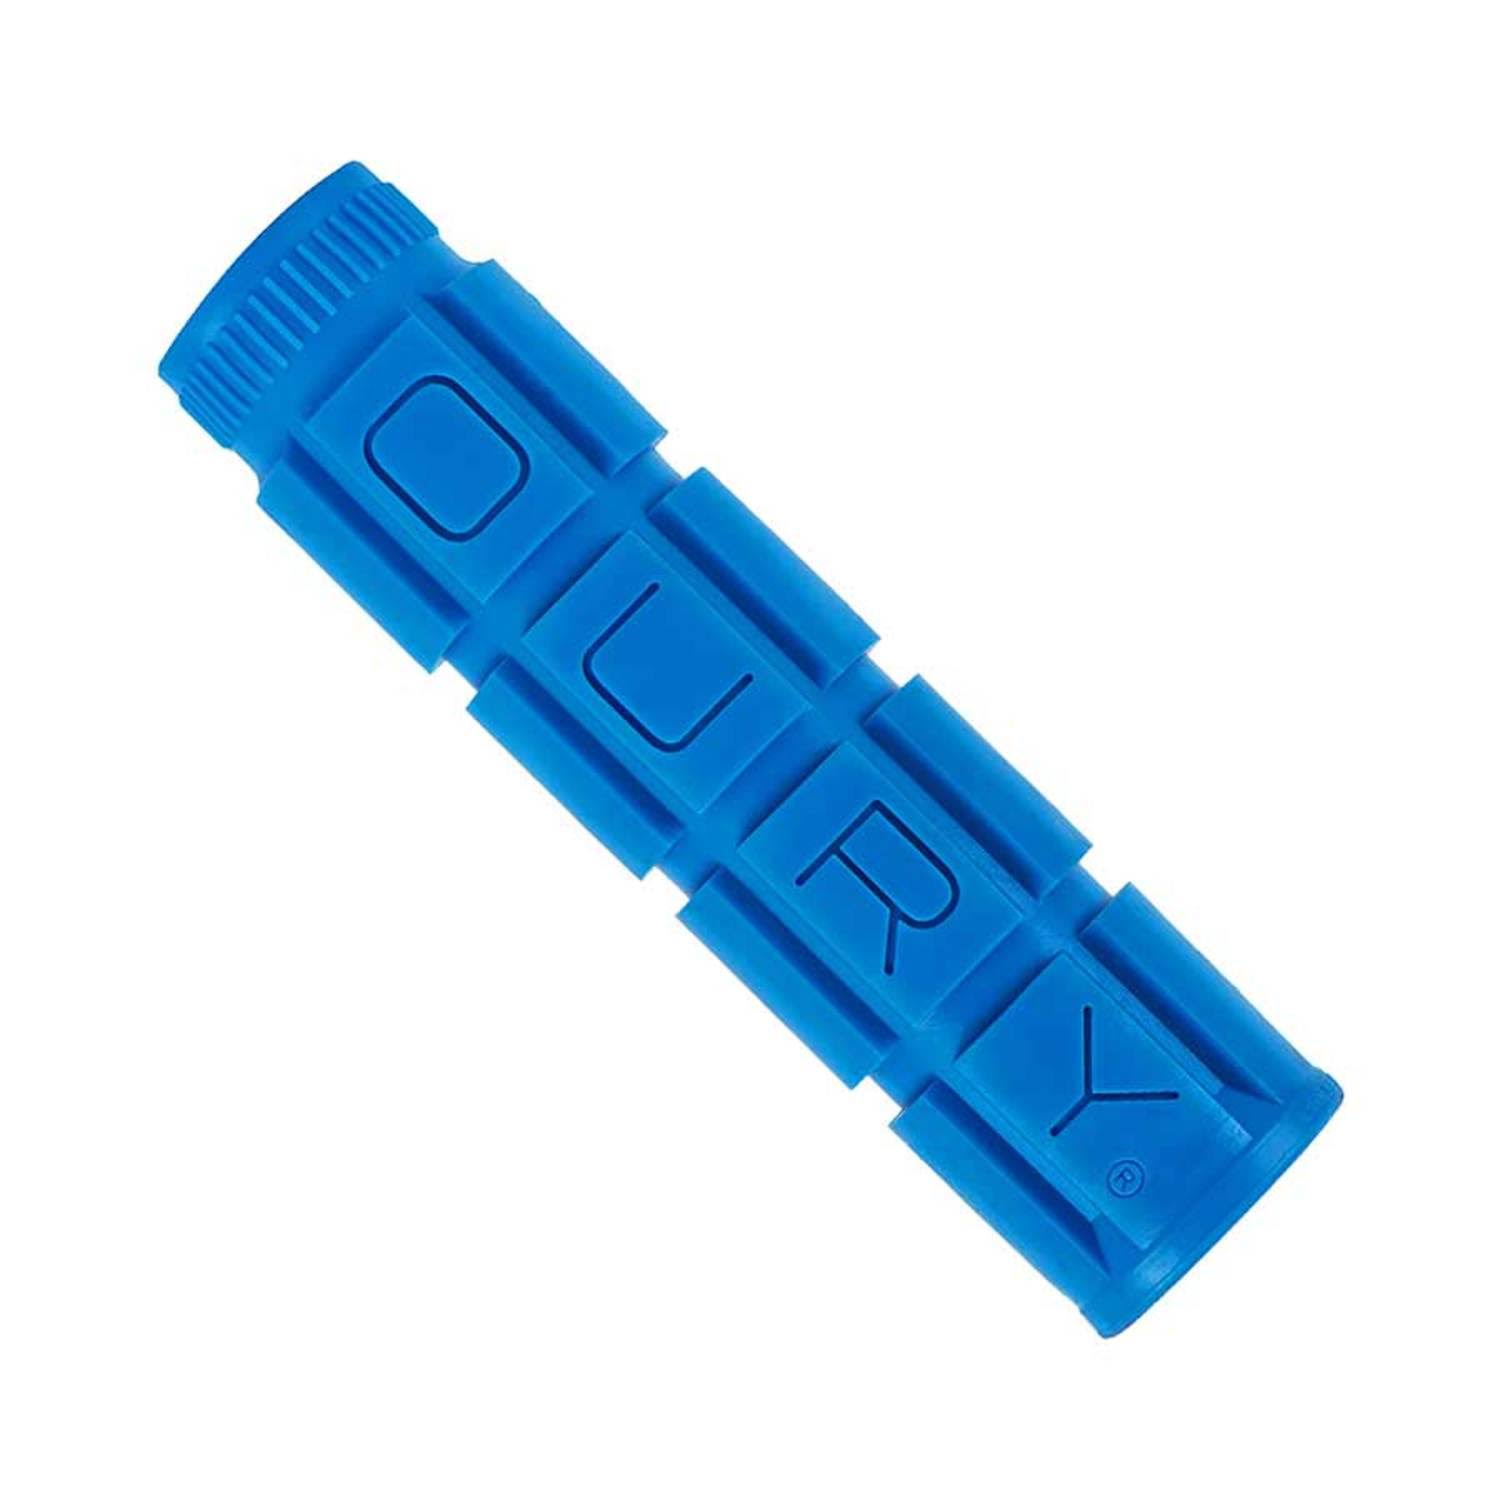 Oury V2 Single Compound MTB Grips Blue